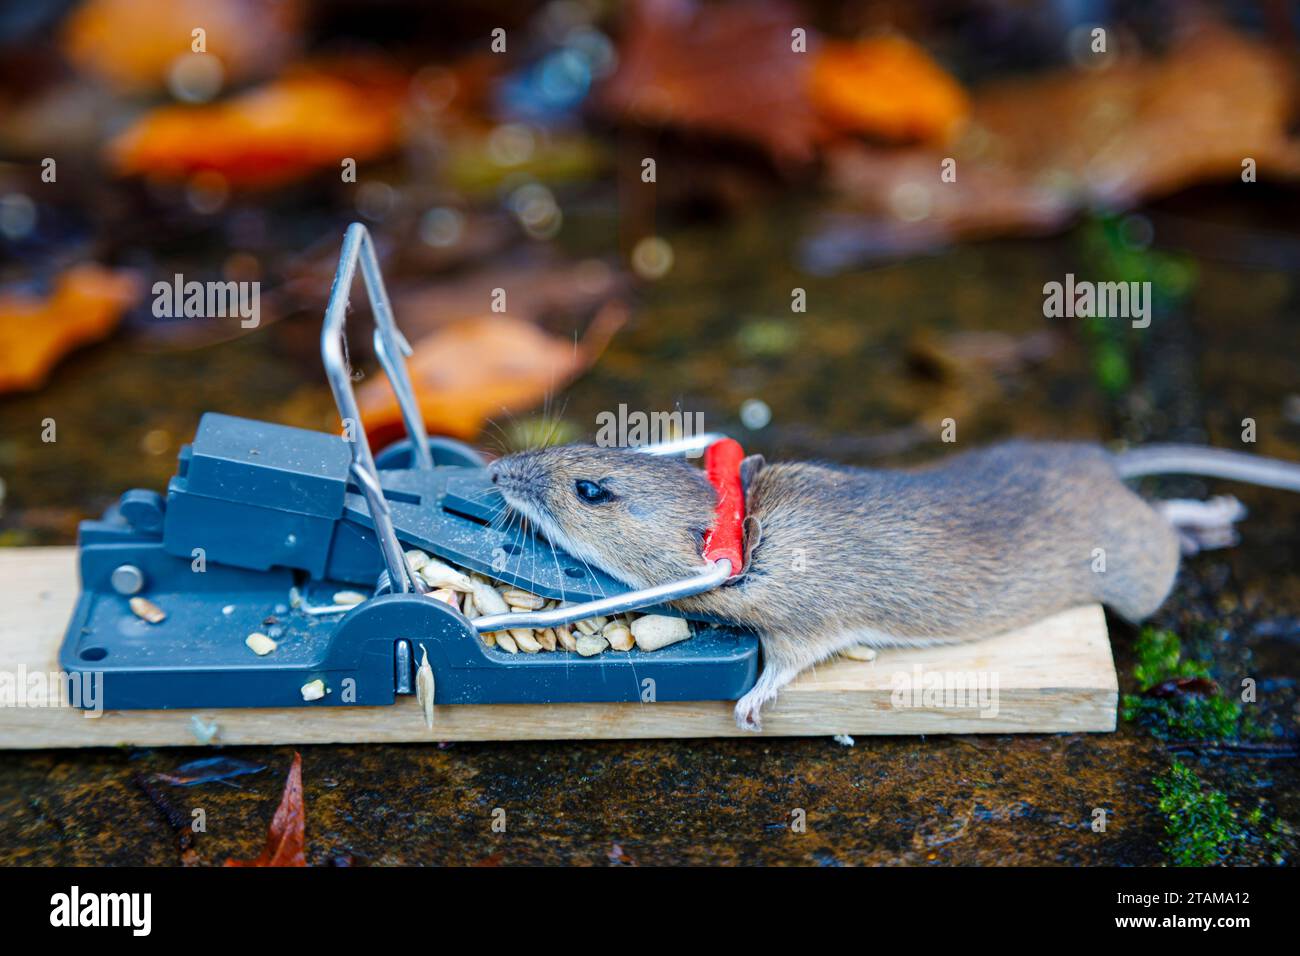 https://c8.alamy.com/comp/2TAMA12/a-dead-house-mouse-mus-musculus-caught-in-a-typical-traditional-baited-humane-spring-loaded-bar-mousetrap-2TAMA12.jpg